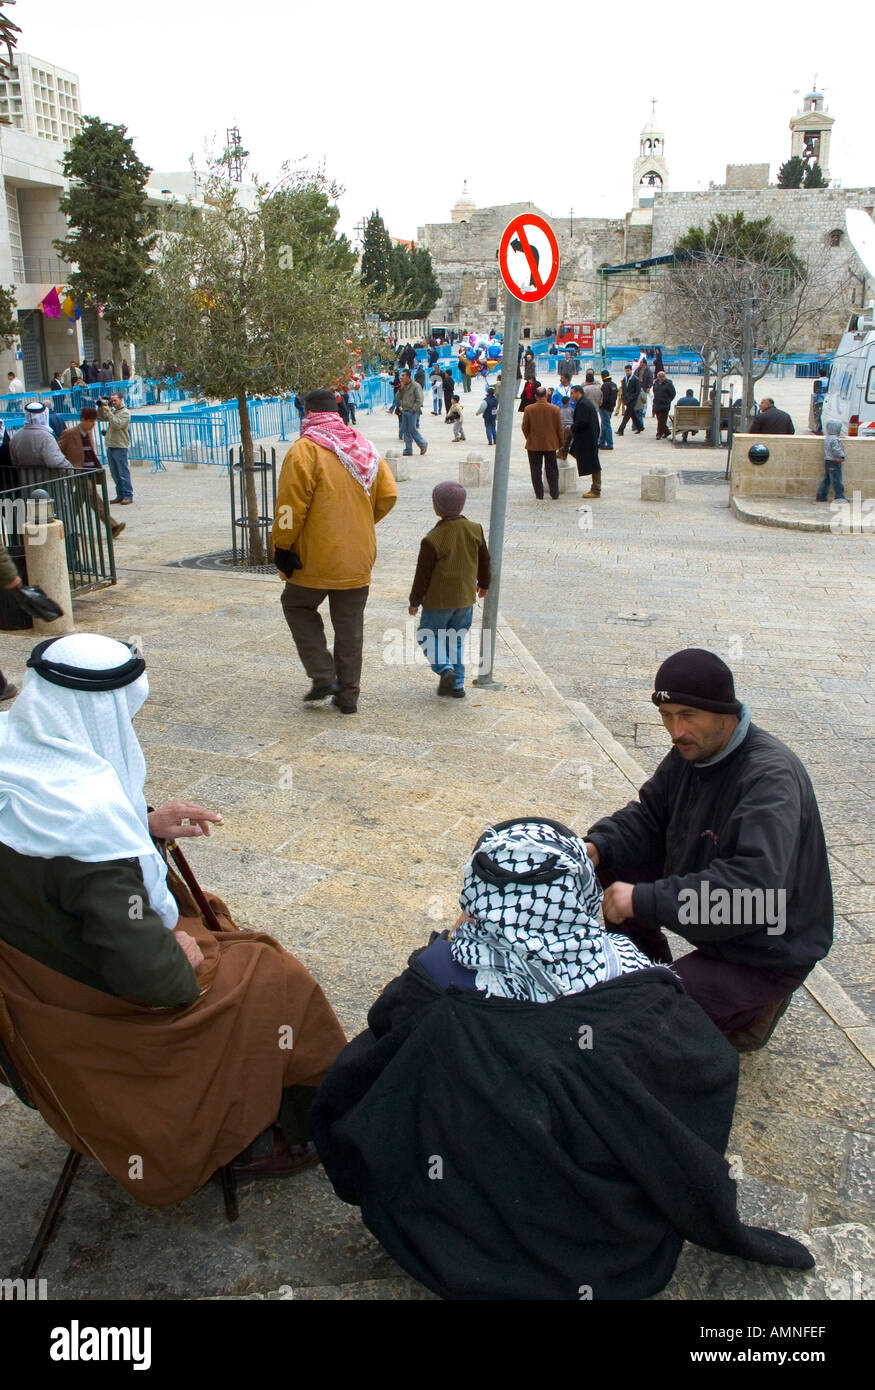 Palestinian Authority Bethlehem Manger Square group of mulem man sitting and talking with church of the nativity in bkgd Stock Photo